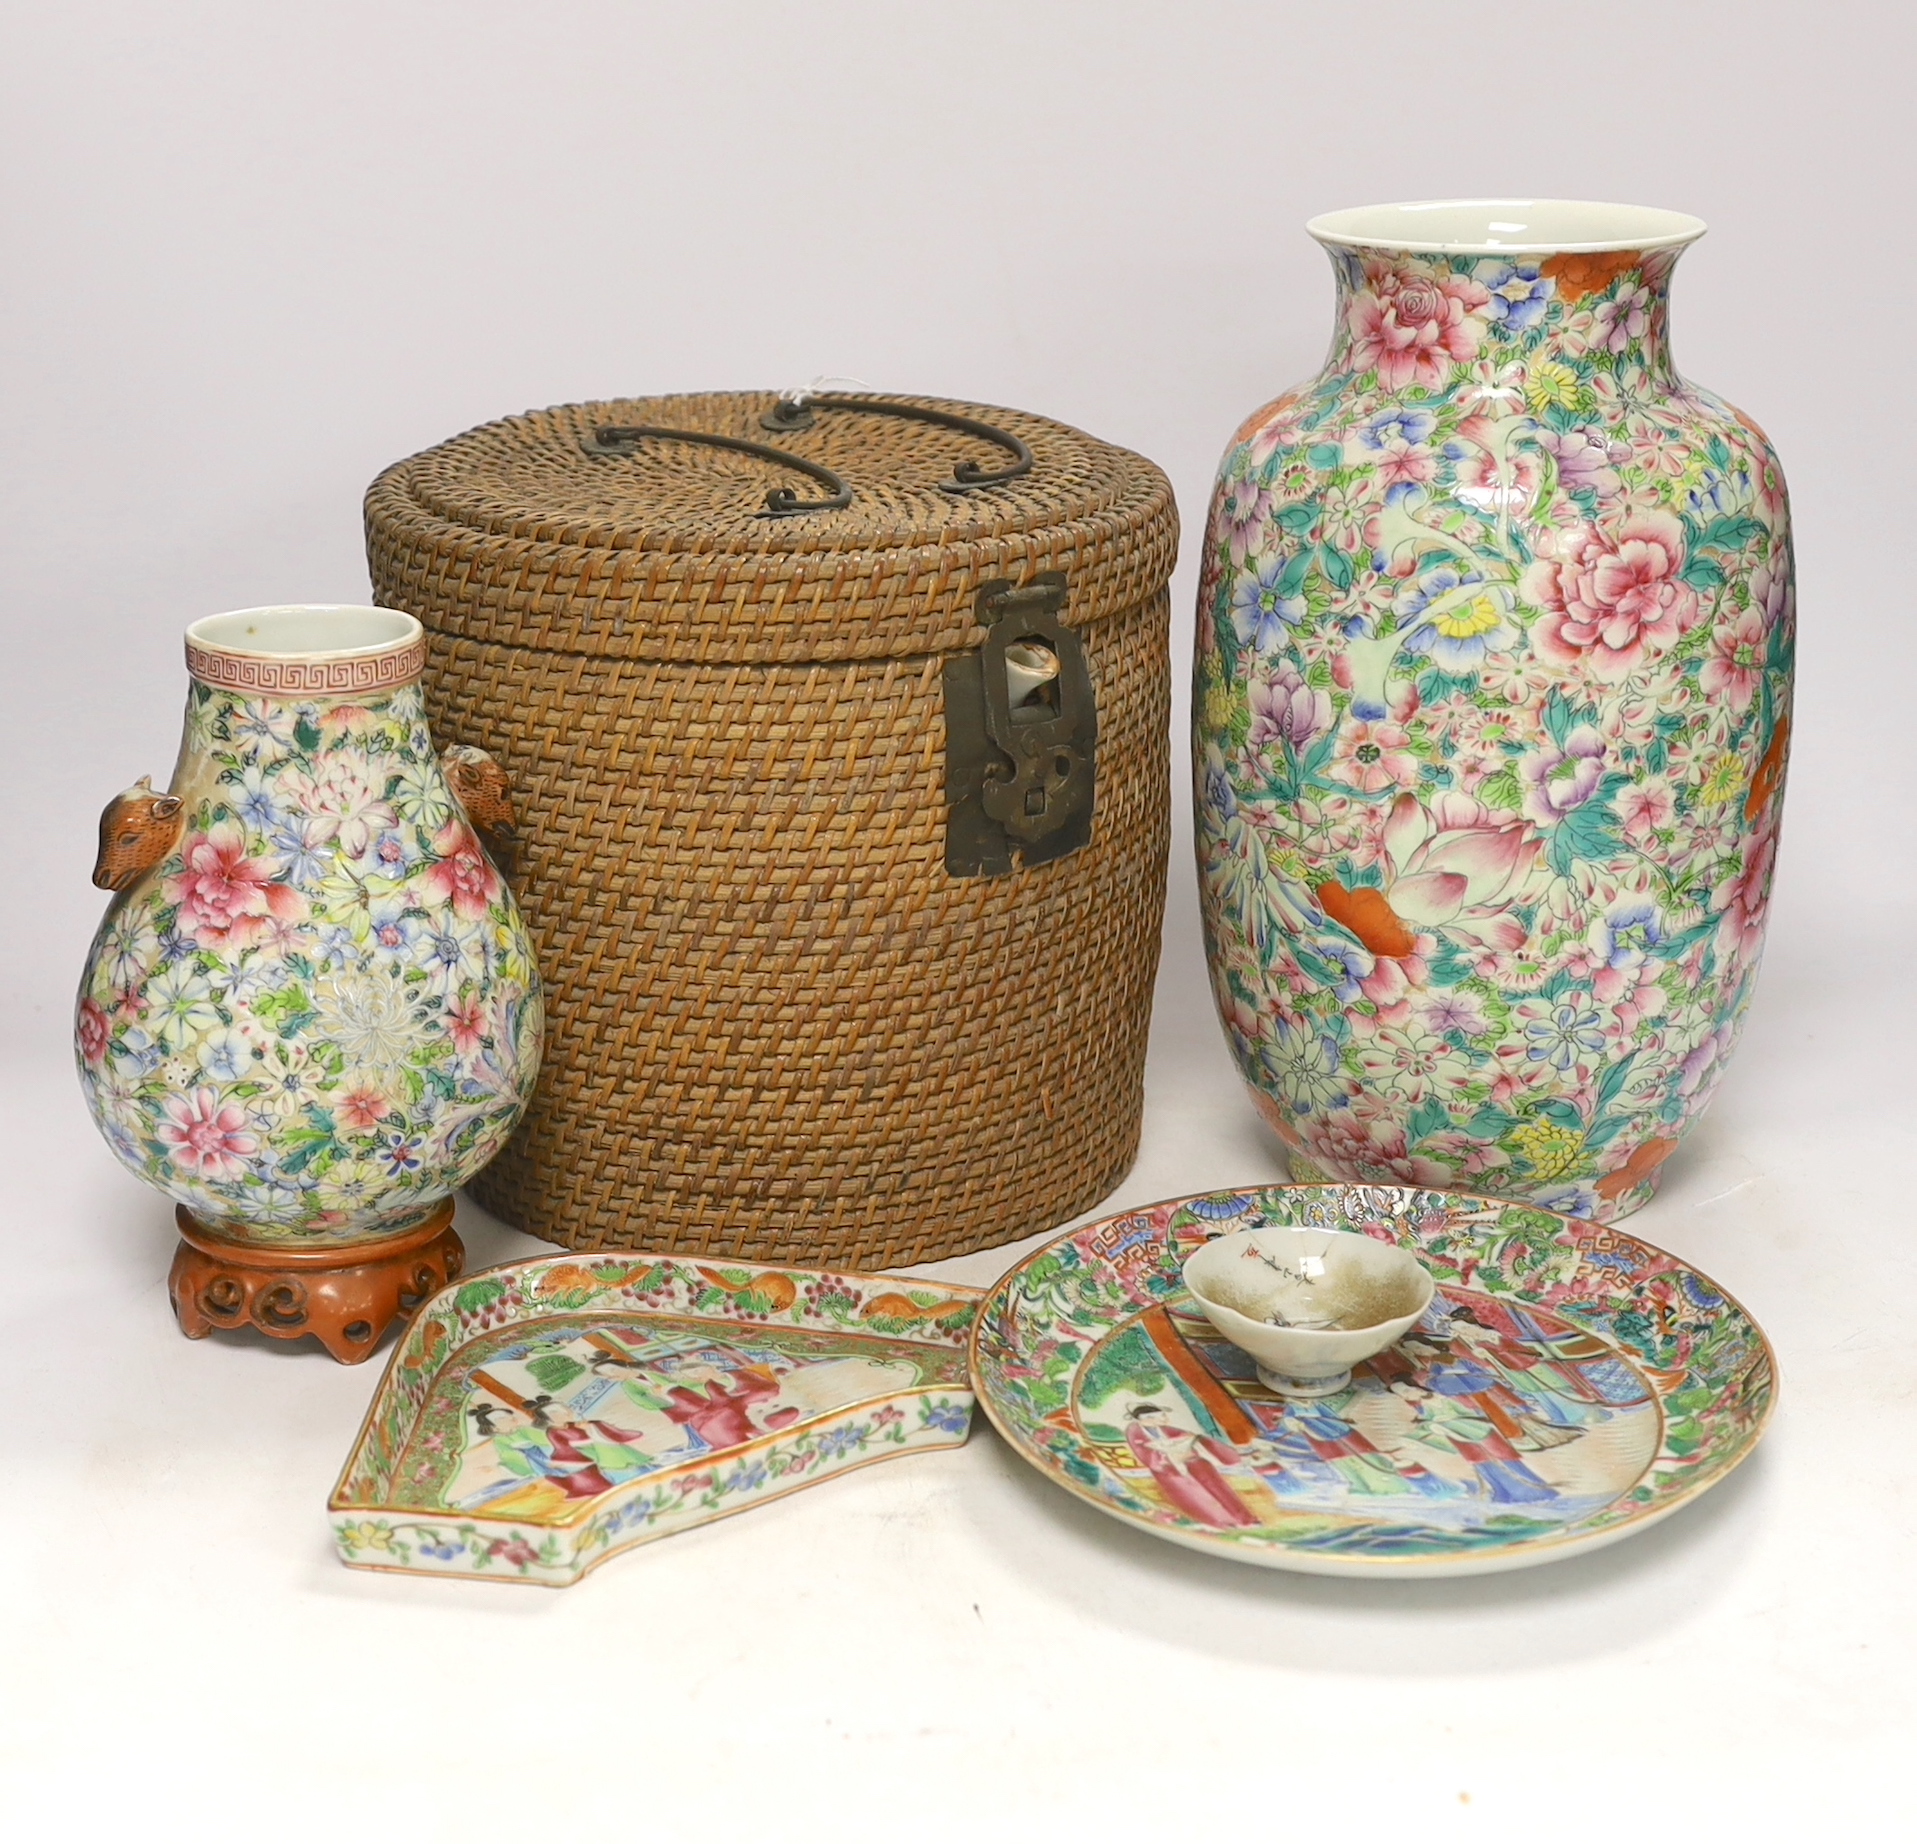 Two Chinese enamelled porcelain Millefleur vases, one with Qianlong Mark, both late 19th/early 20th century, together with two Chinese famille rose dishes and a similar basket cased tea kettle